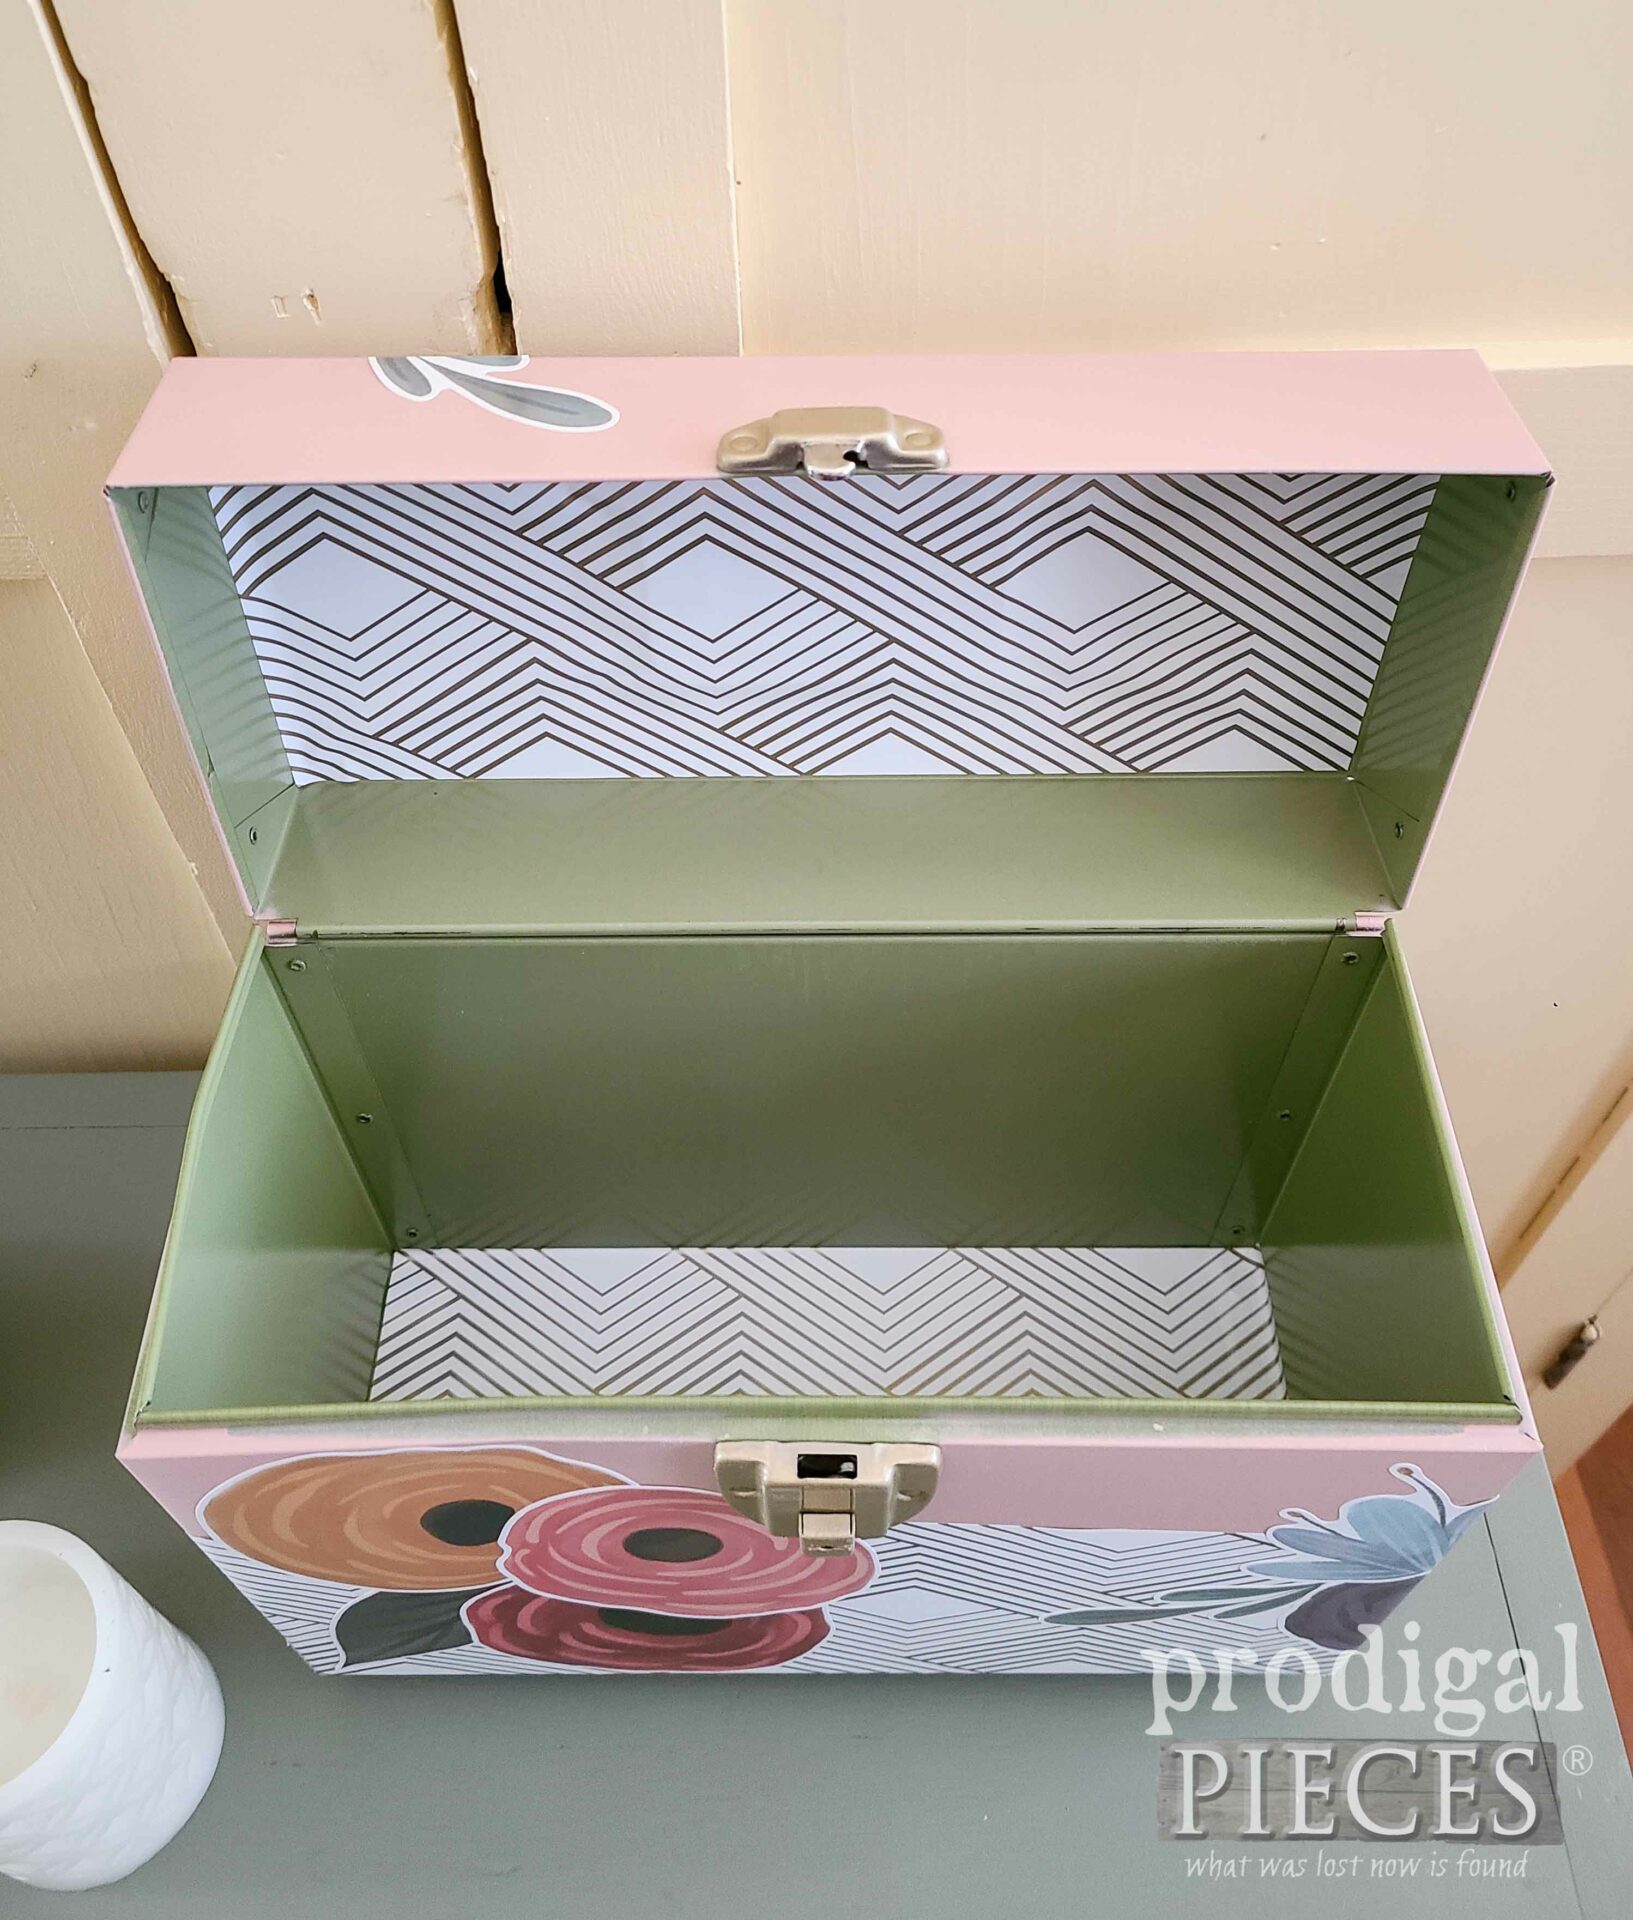 Inside Vintage Metal Filing Box Decorated by Larissa of Prodigal Pieces | prodigalpieces.com #prodigalpieces #boho #storage #vintage